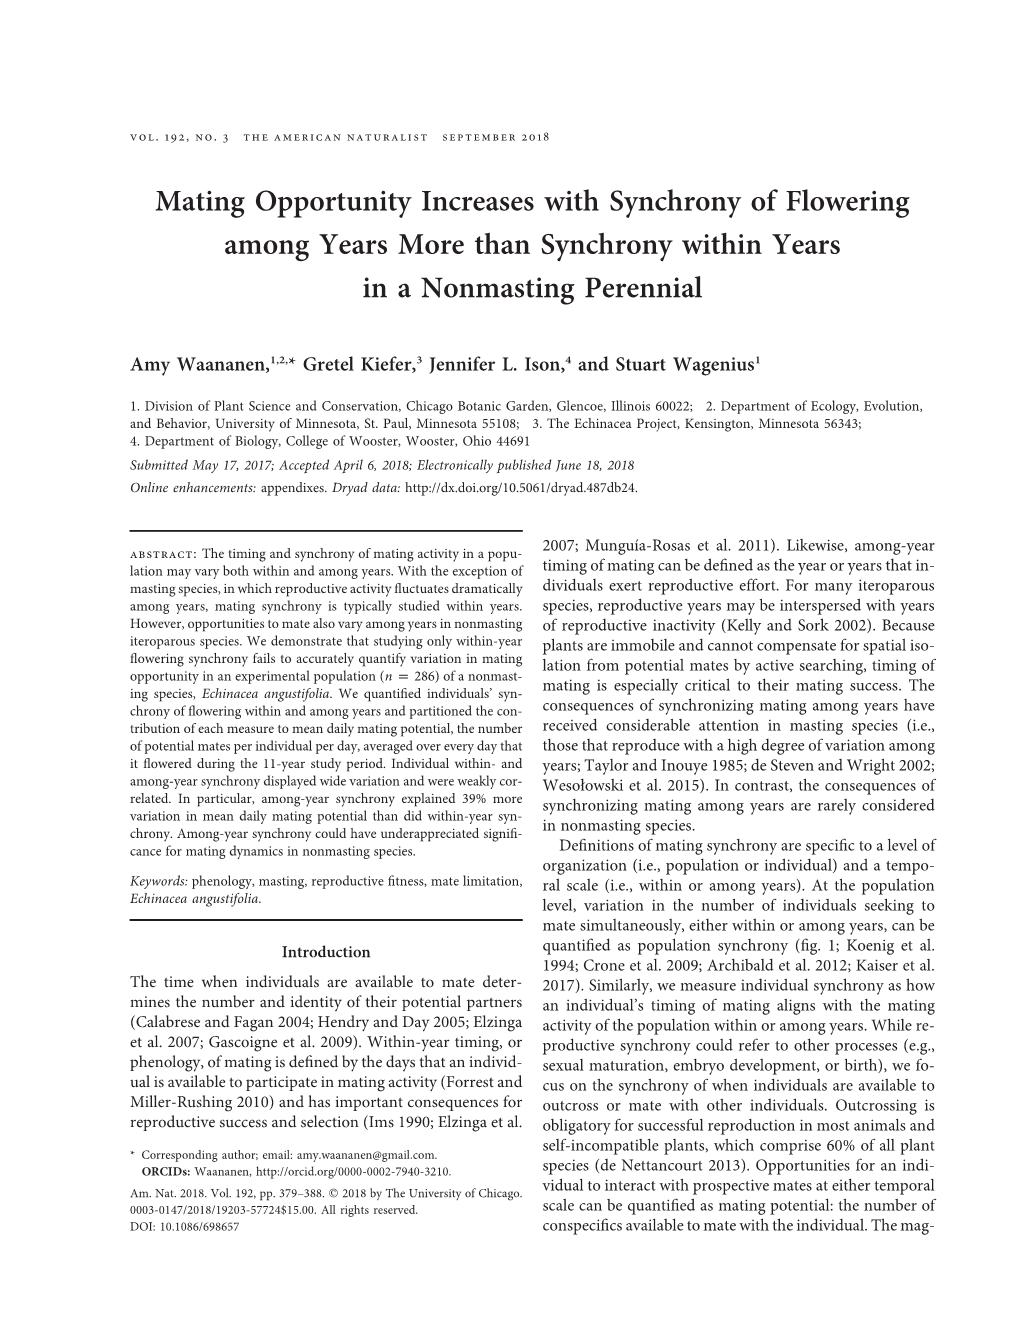 Mating Opportunity Increases with Synchrony of Flowering Among Years More Than Synchrony Within Years in a Nonmasting Perennial